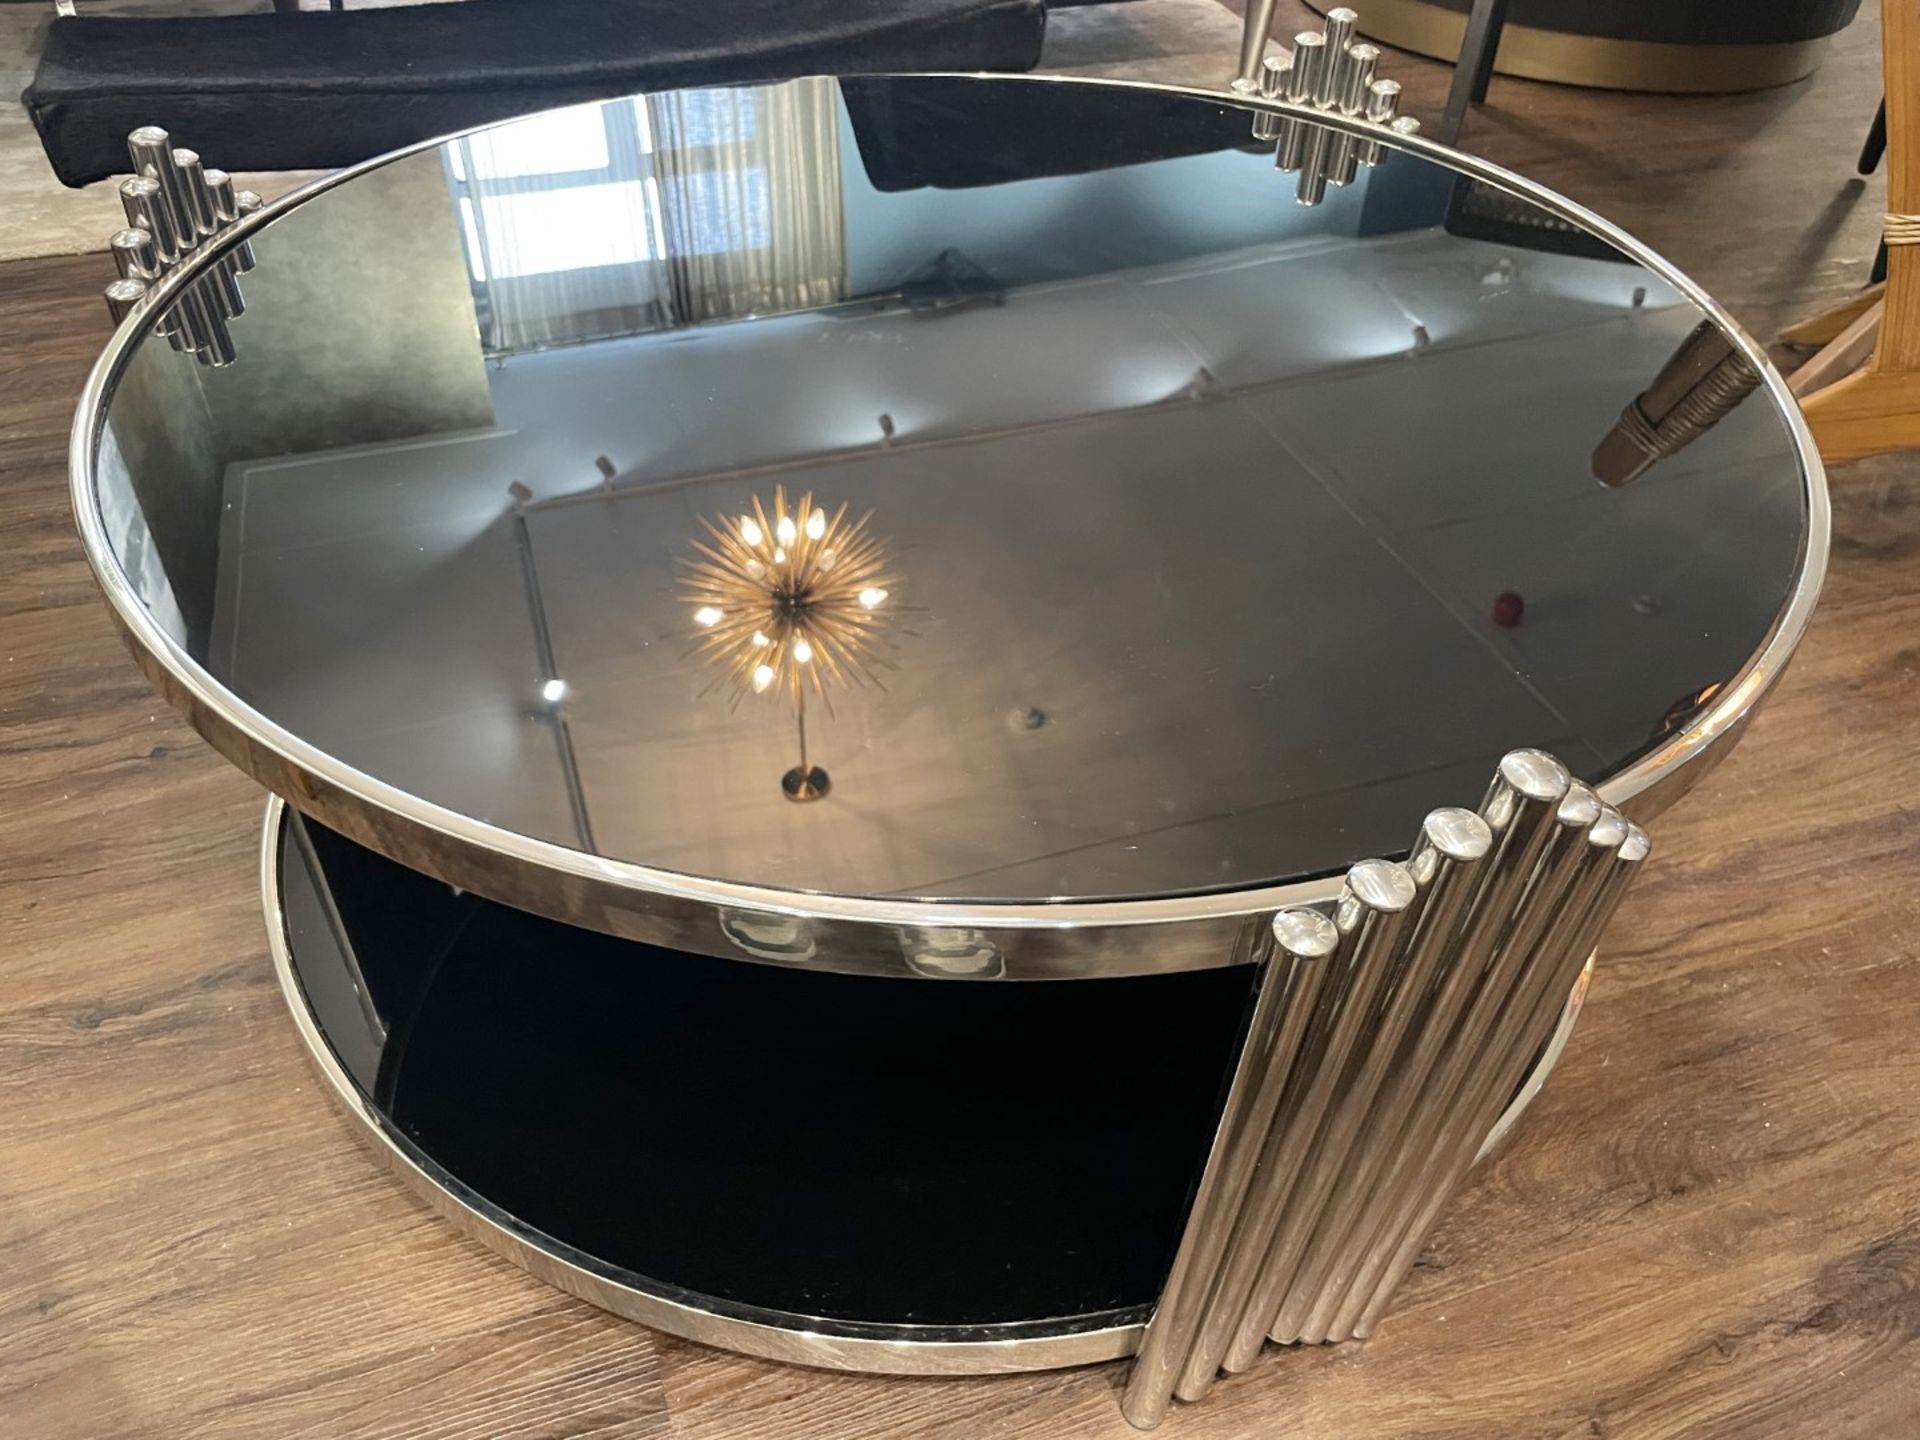 1 x Designer Opulent Black Glass Lined 2-Tier Coffee Table with a Metal Base and Pipe Decoration - Image 2 of 6